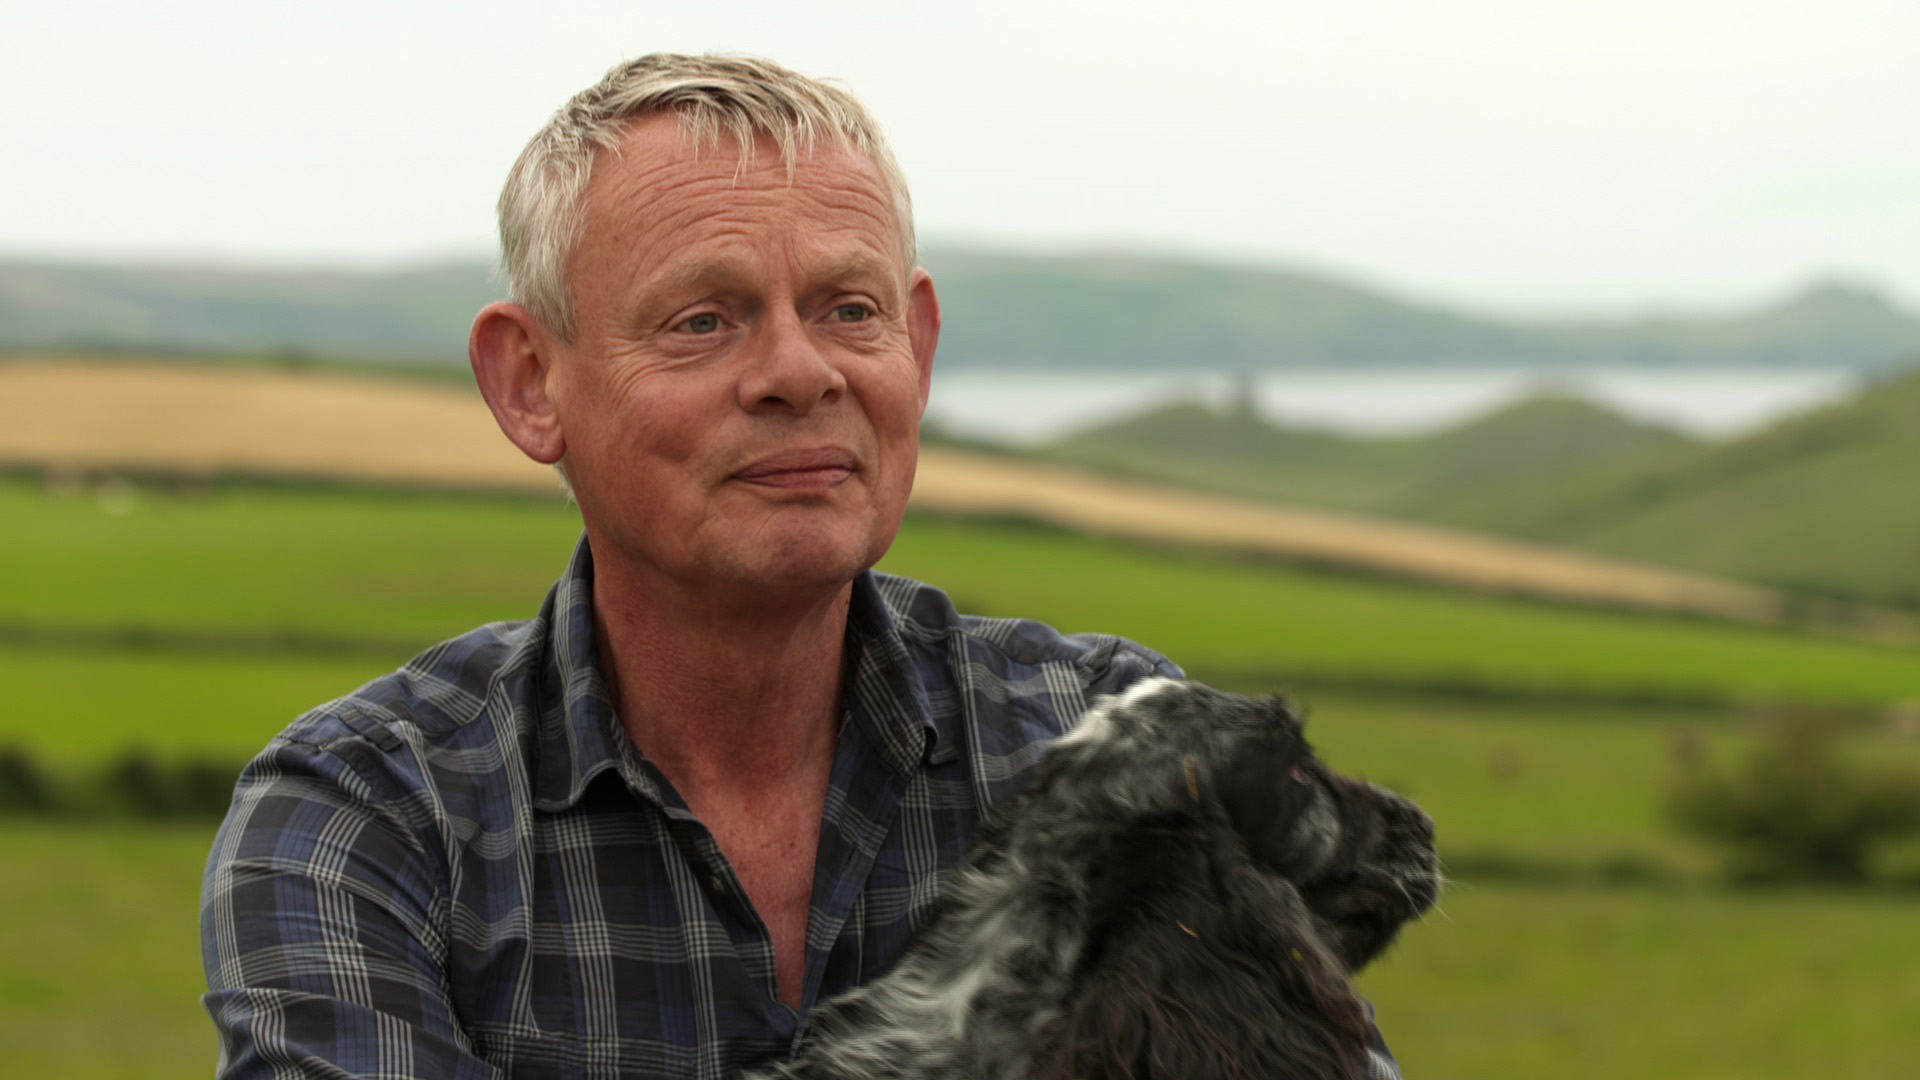 Watch DOC MARTIN Season 9 30 second promo ("Now Available")